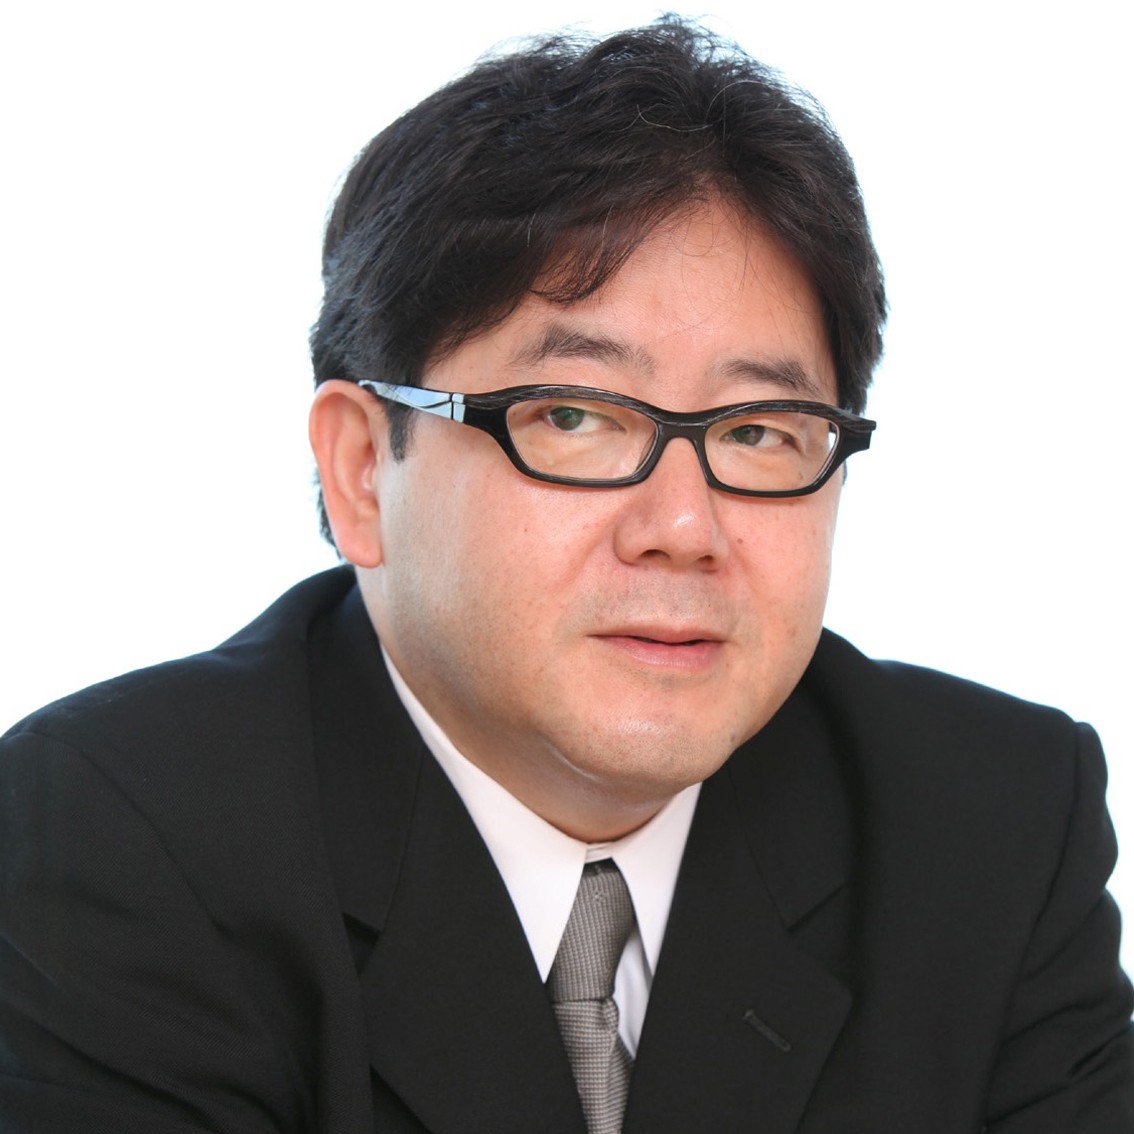 AKB48 Producer Yasushi Akimoto Surprises Everyone with Decision to Join the Group as a Member